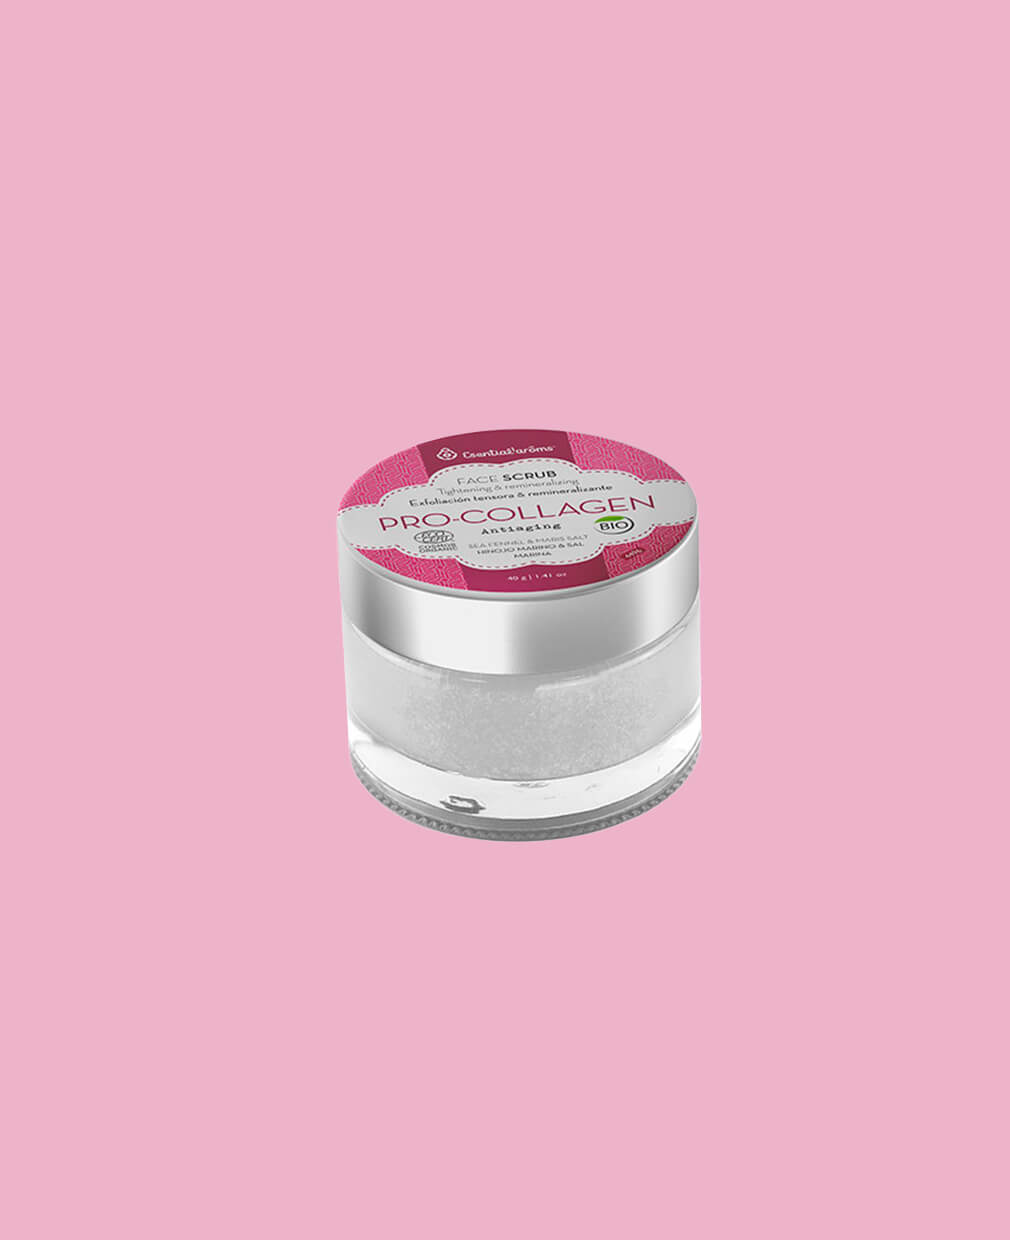 Face Scurb Pro Collagen hover